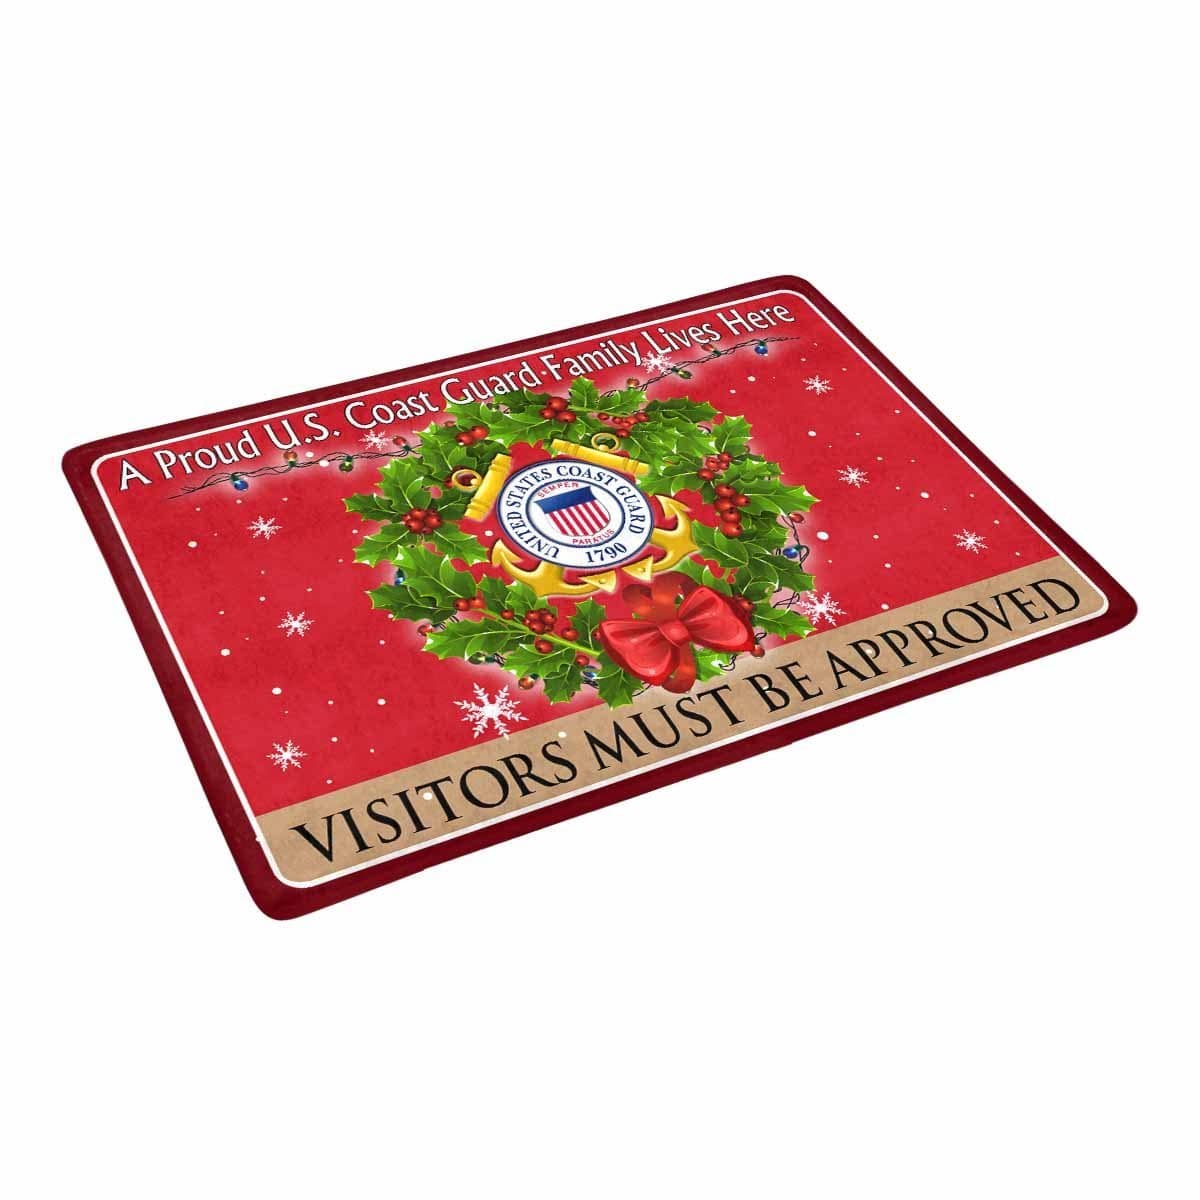 A Proud US Coast Guard Military Family Lives Here-Vistor must be approved Christmas Doormat-Doormat-USCG-Logo-Veterans Nation